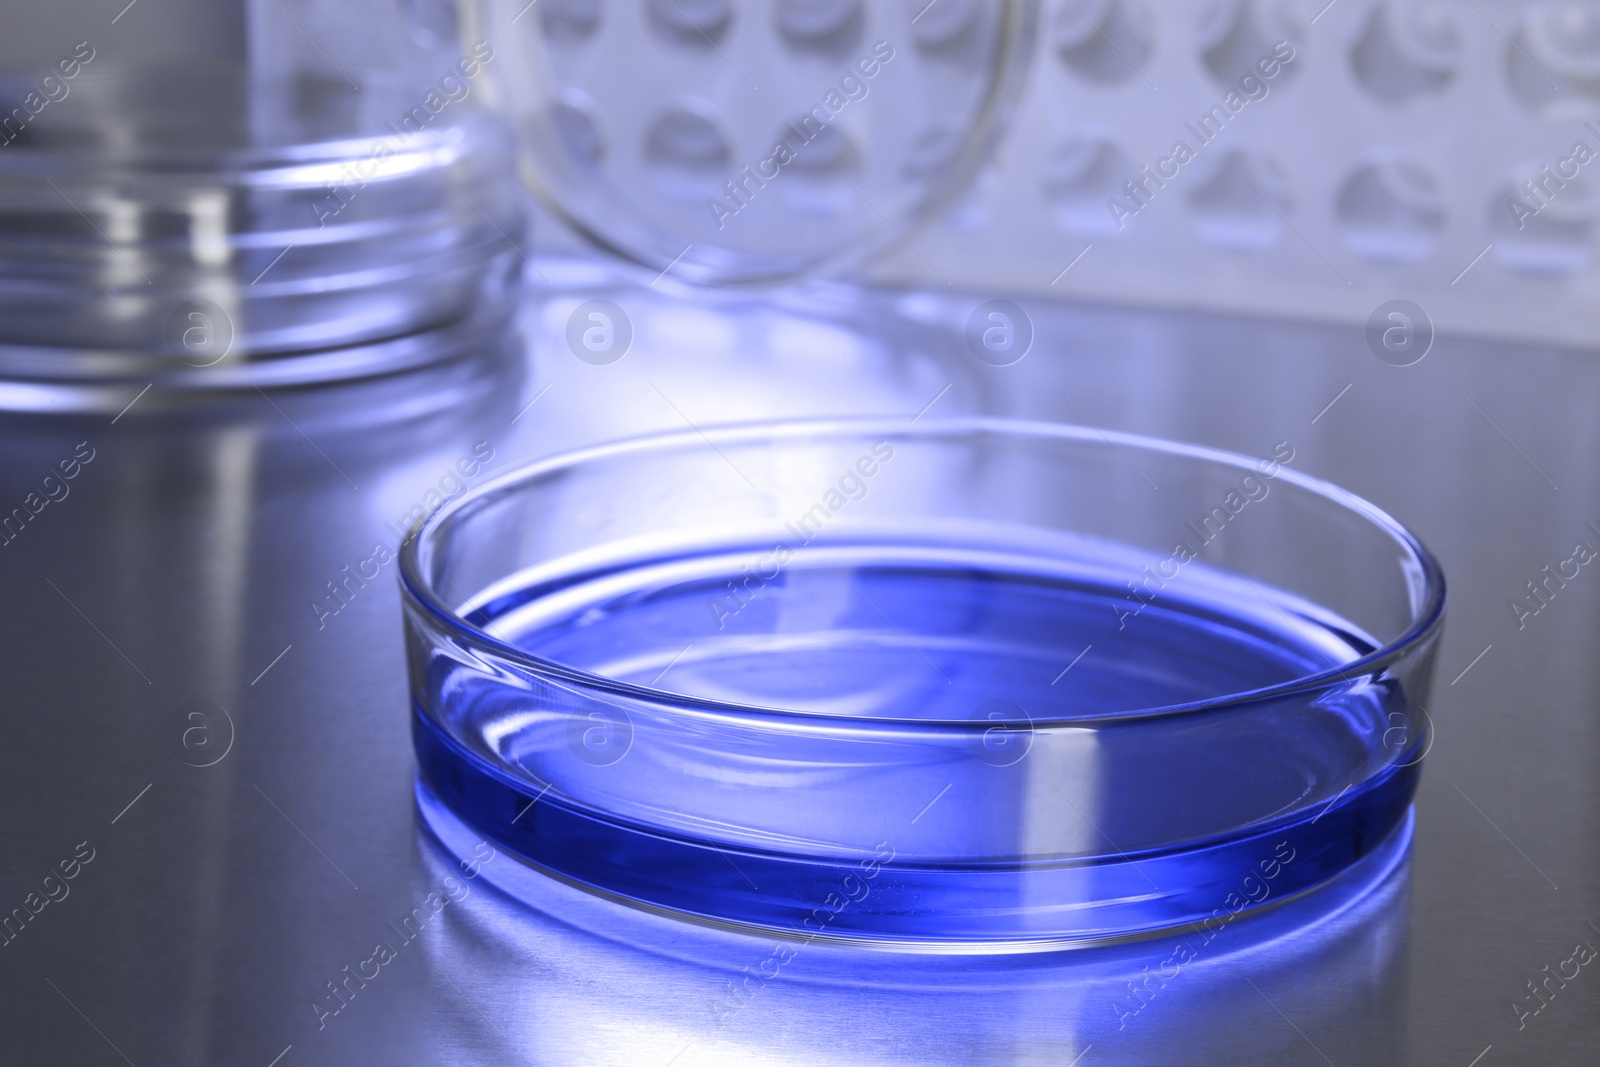 Image of Petri dishes with blue liquid on table, closeup. Laboratory glassware